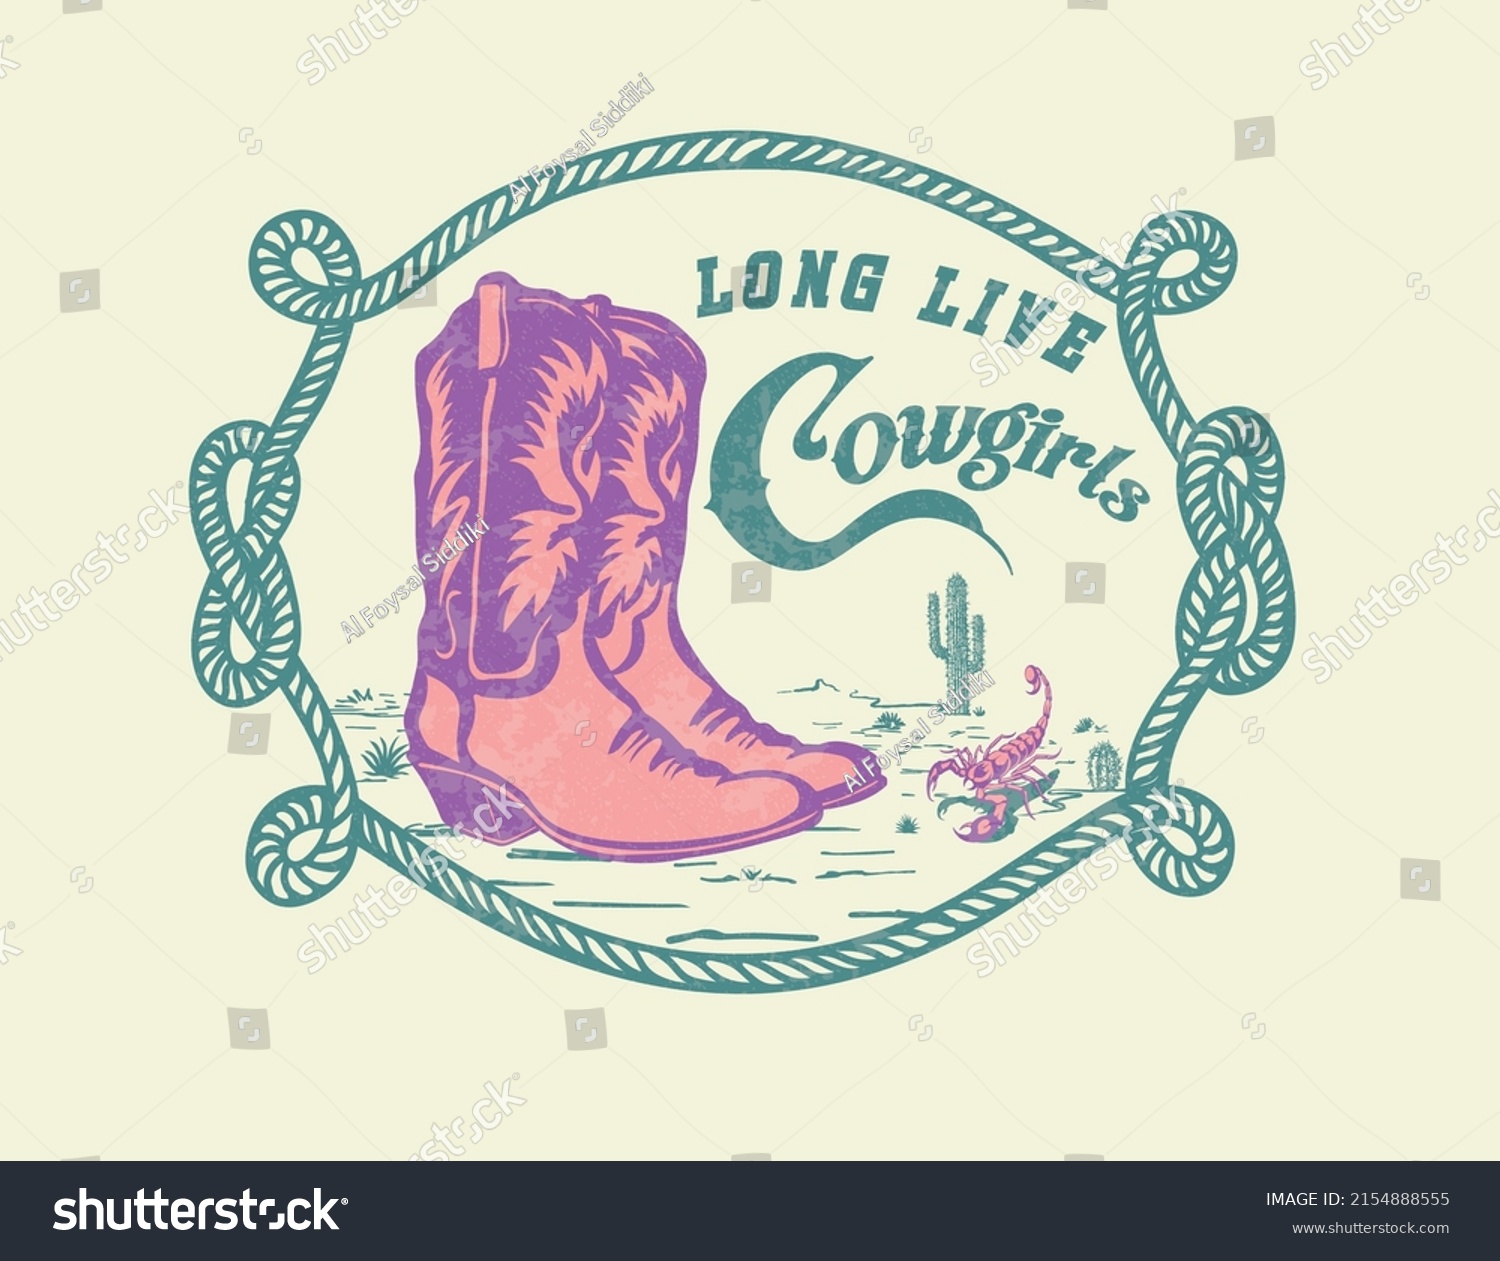 Cowgirl Boots Typography Vector Design Stock Vector (Royalty Free ...